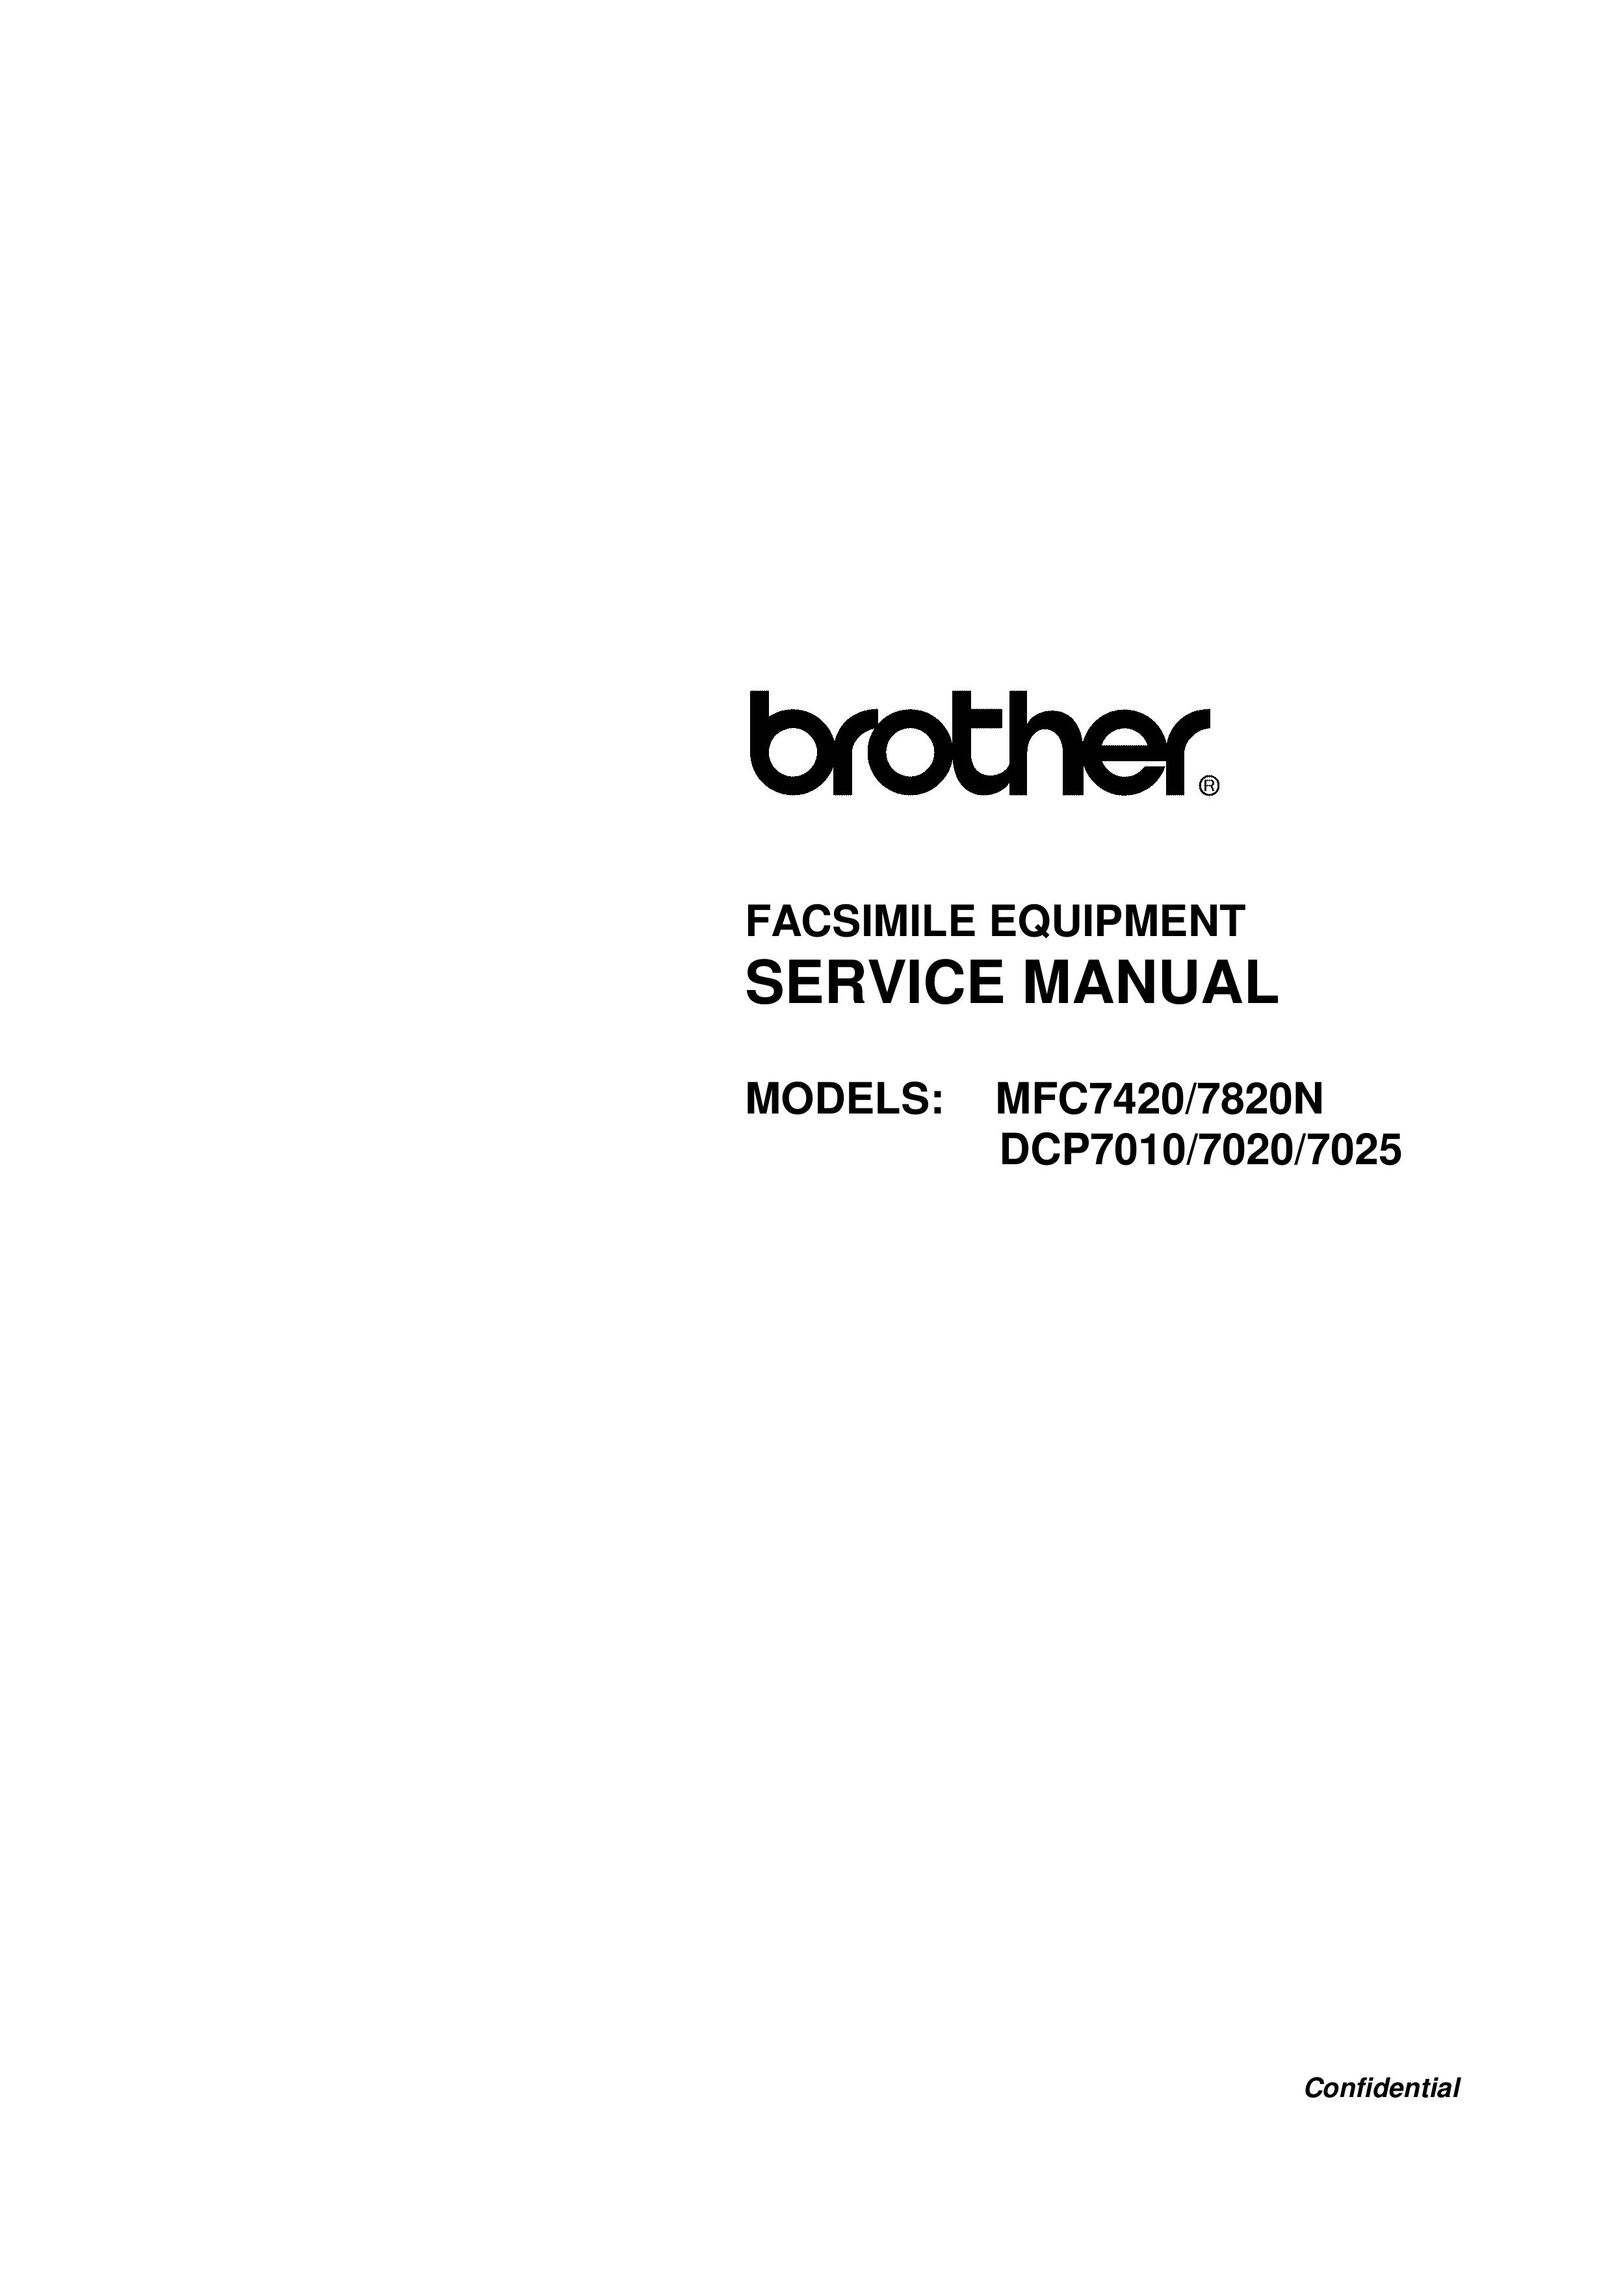 Brother DCP7025 Fax Machine User Manual